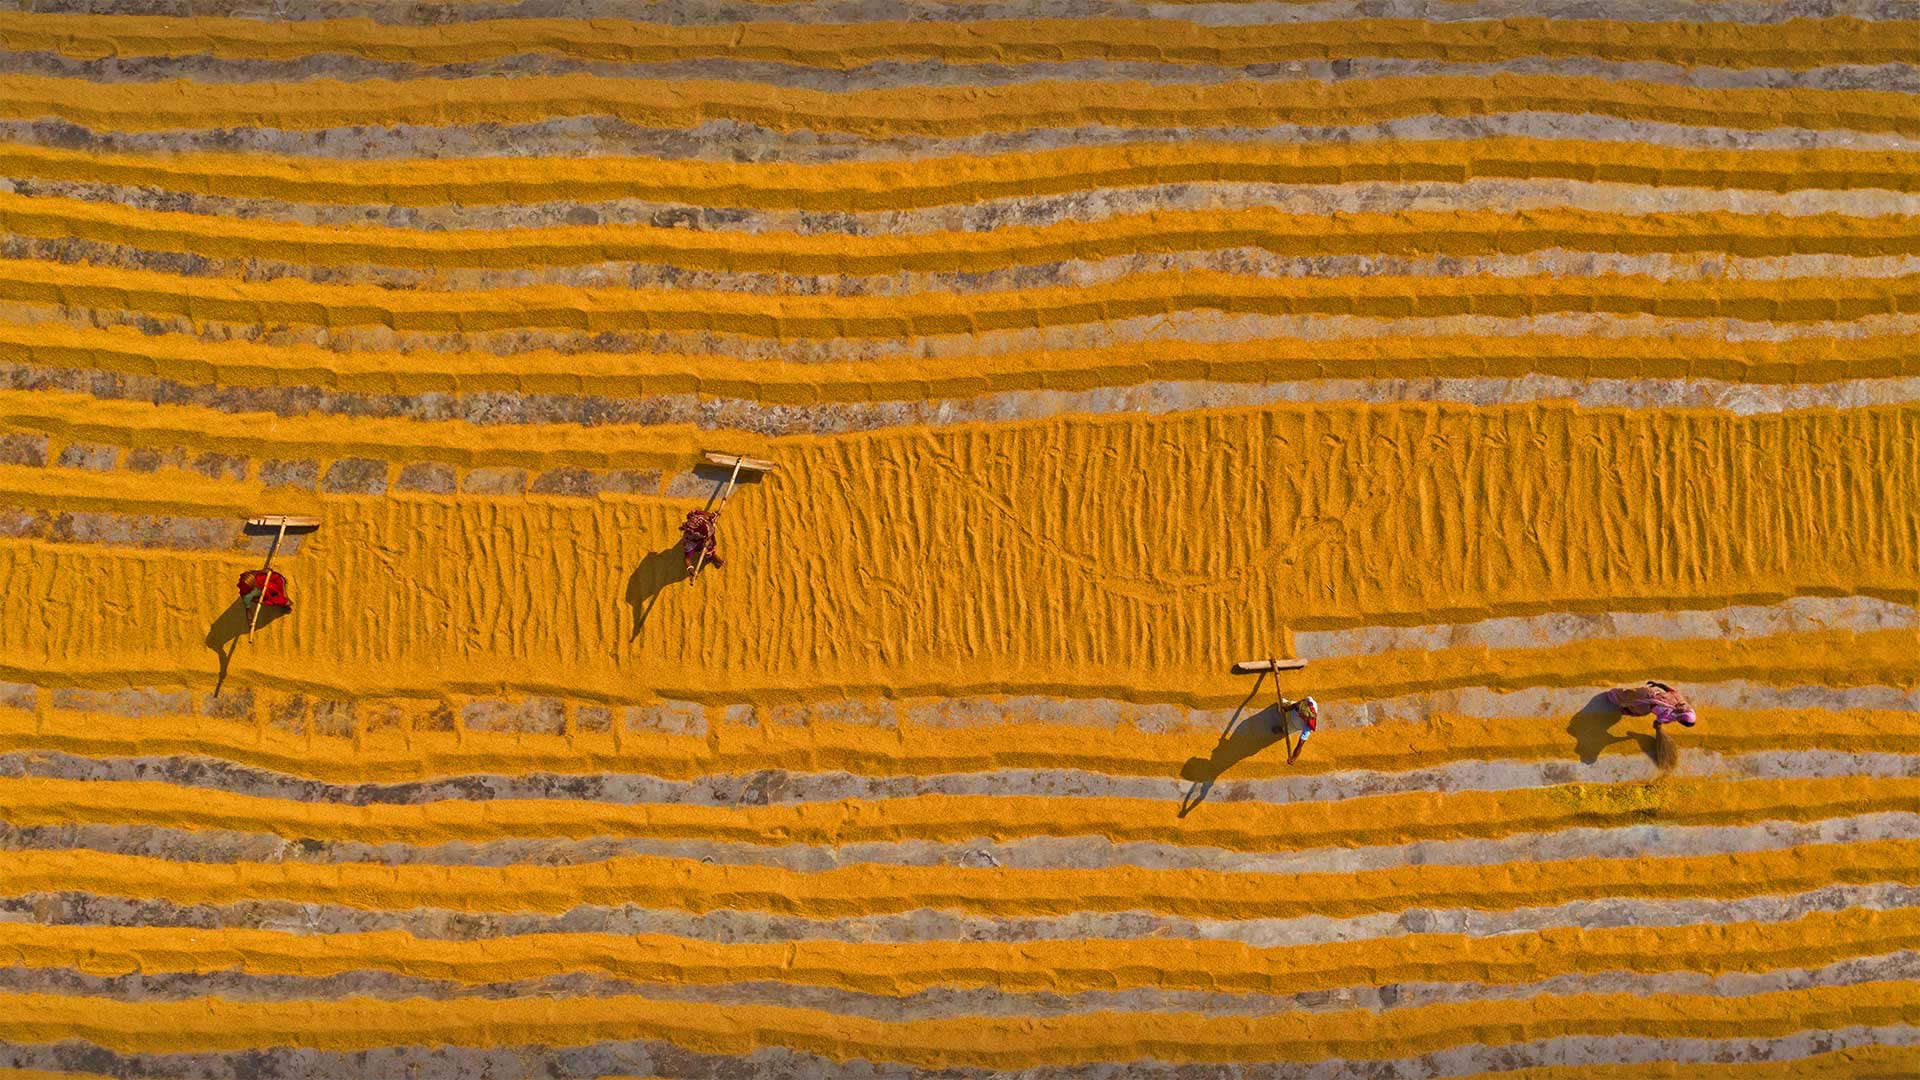 Rice laid out to dry in Dhamrai, Dhaka, Bangladesh - Amazing Aerial Agency/Offset by Shutterstock)